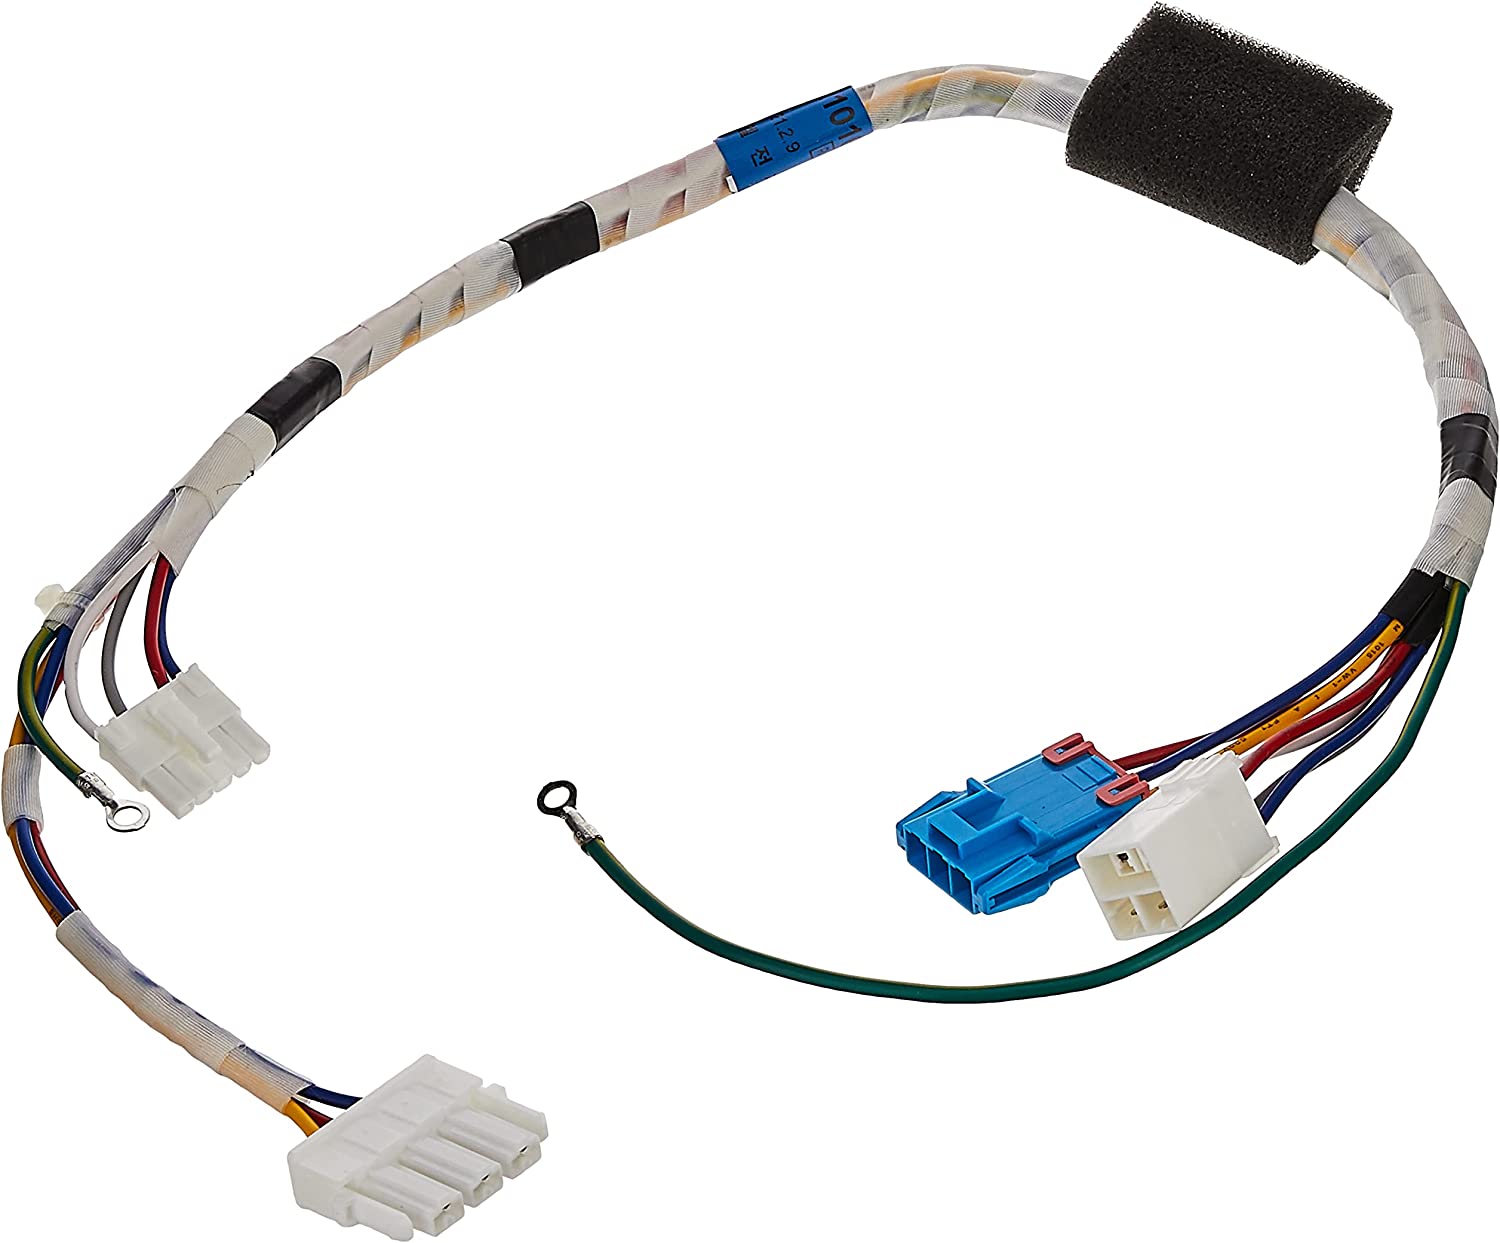 LG Washer Stator Wiring Harness. Part #EAD62061008